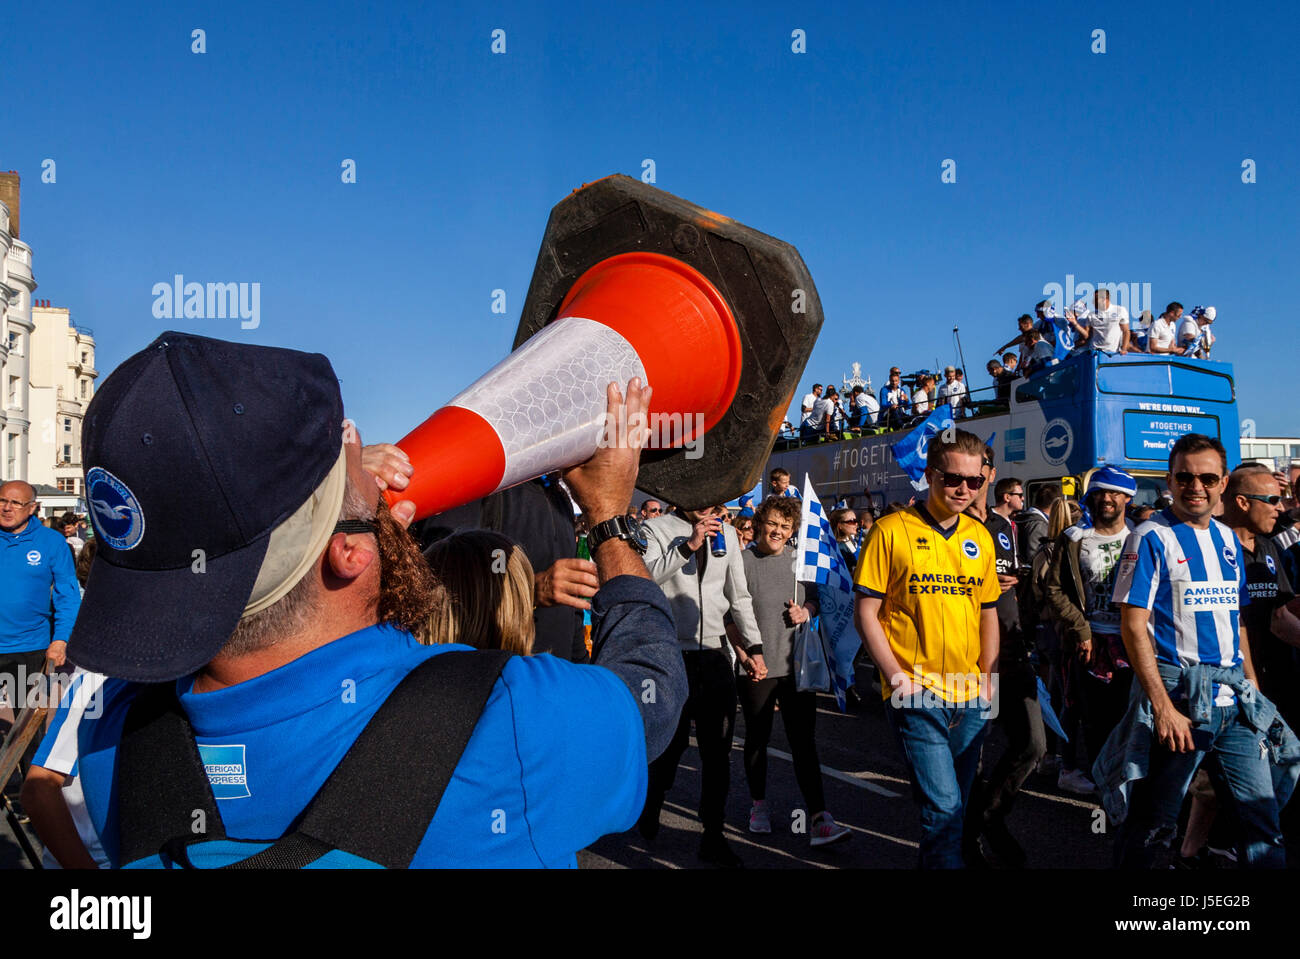 A Brighton and Hove Albion Football Fan Shouts Into A Traffic Cone As The The Team Bus Passes During The Club's Promotion Parade, Brighton, UK Stock Photo